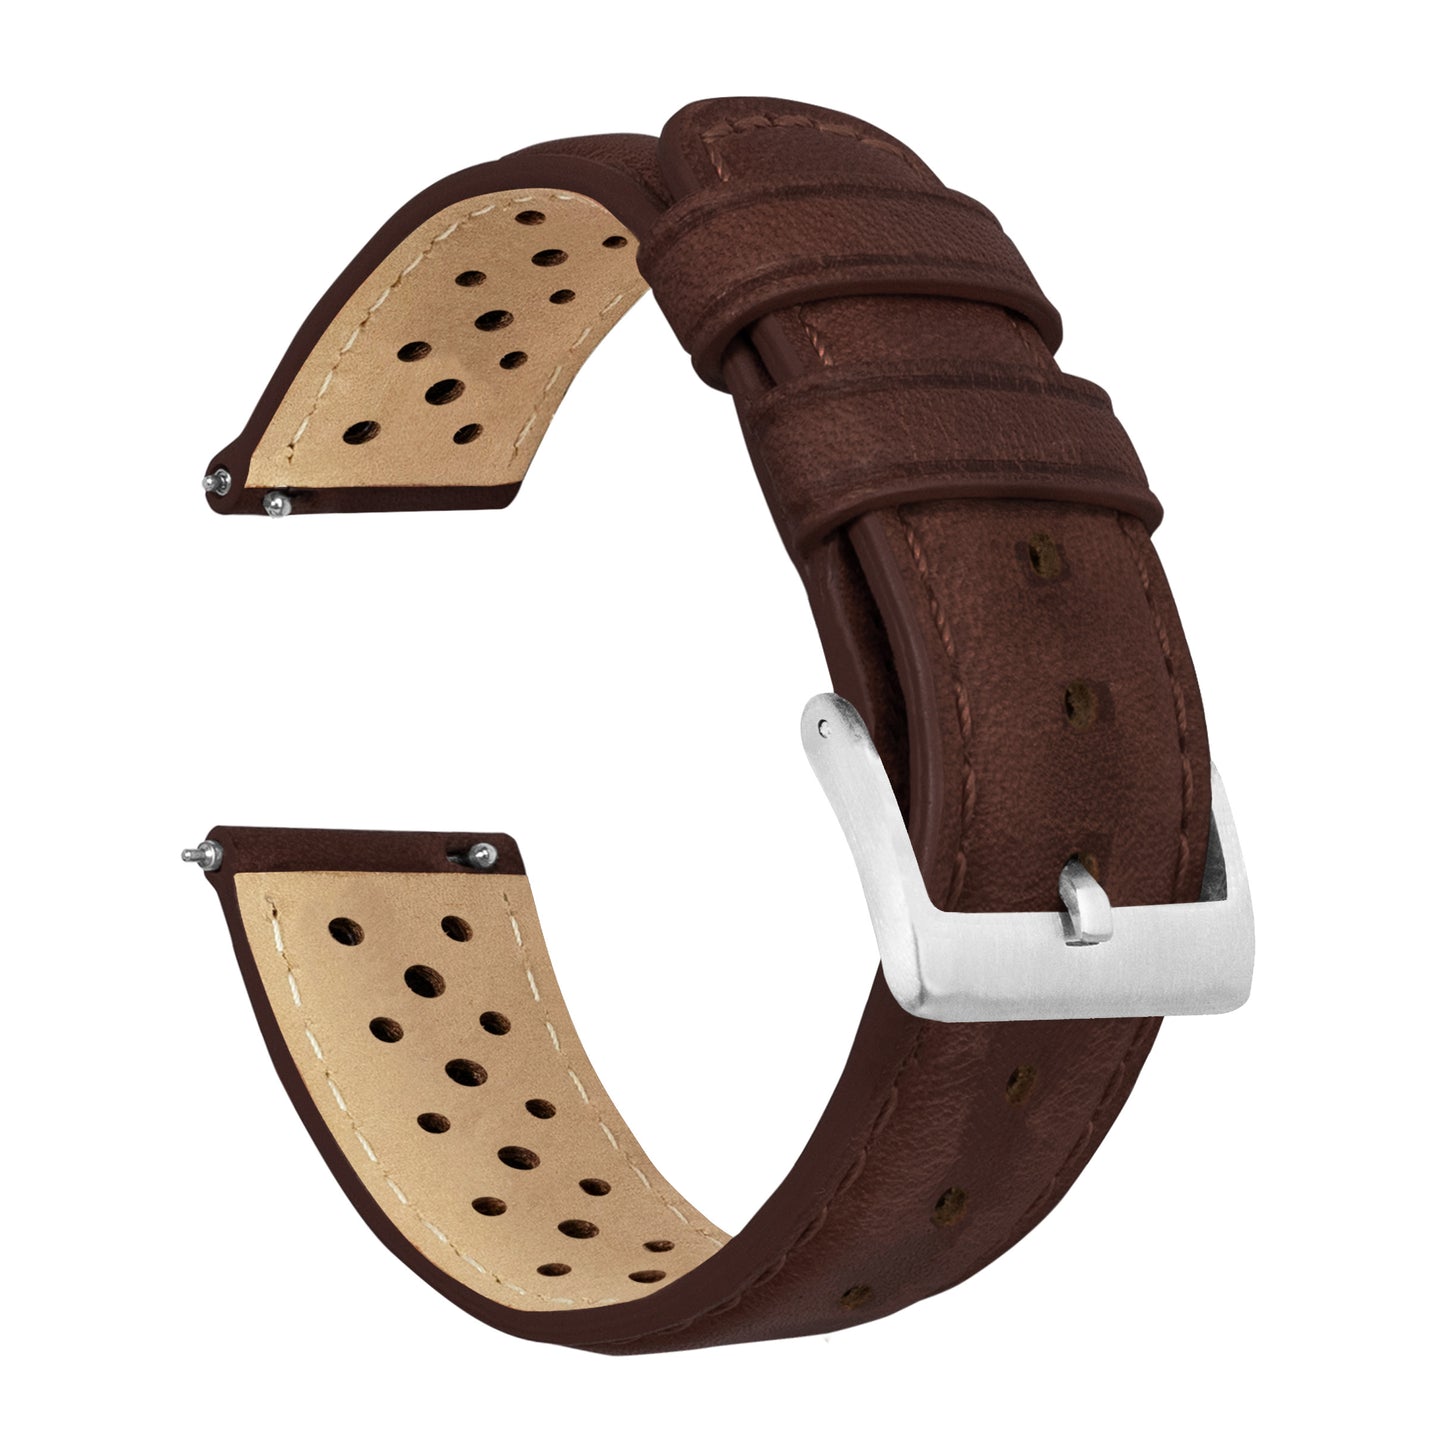 Fossil Sport | Racing Horween Leather | Chocolate Brown - Barton Watch Bands